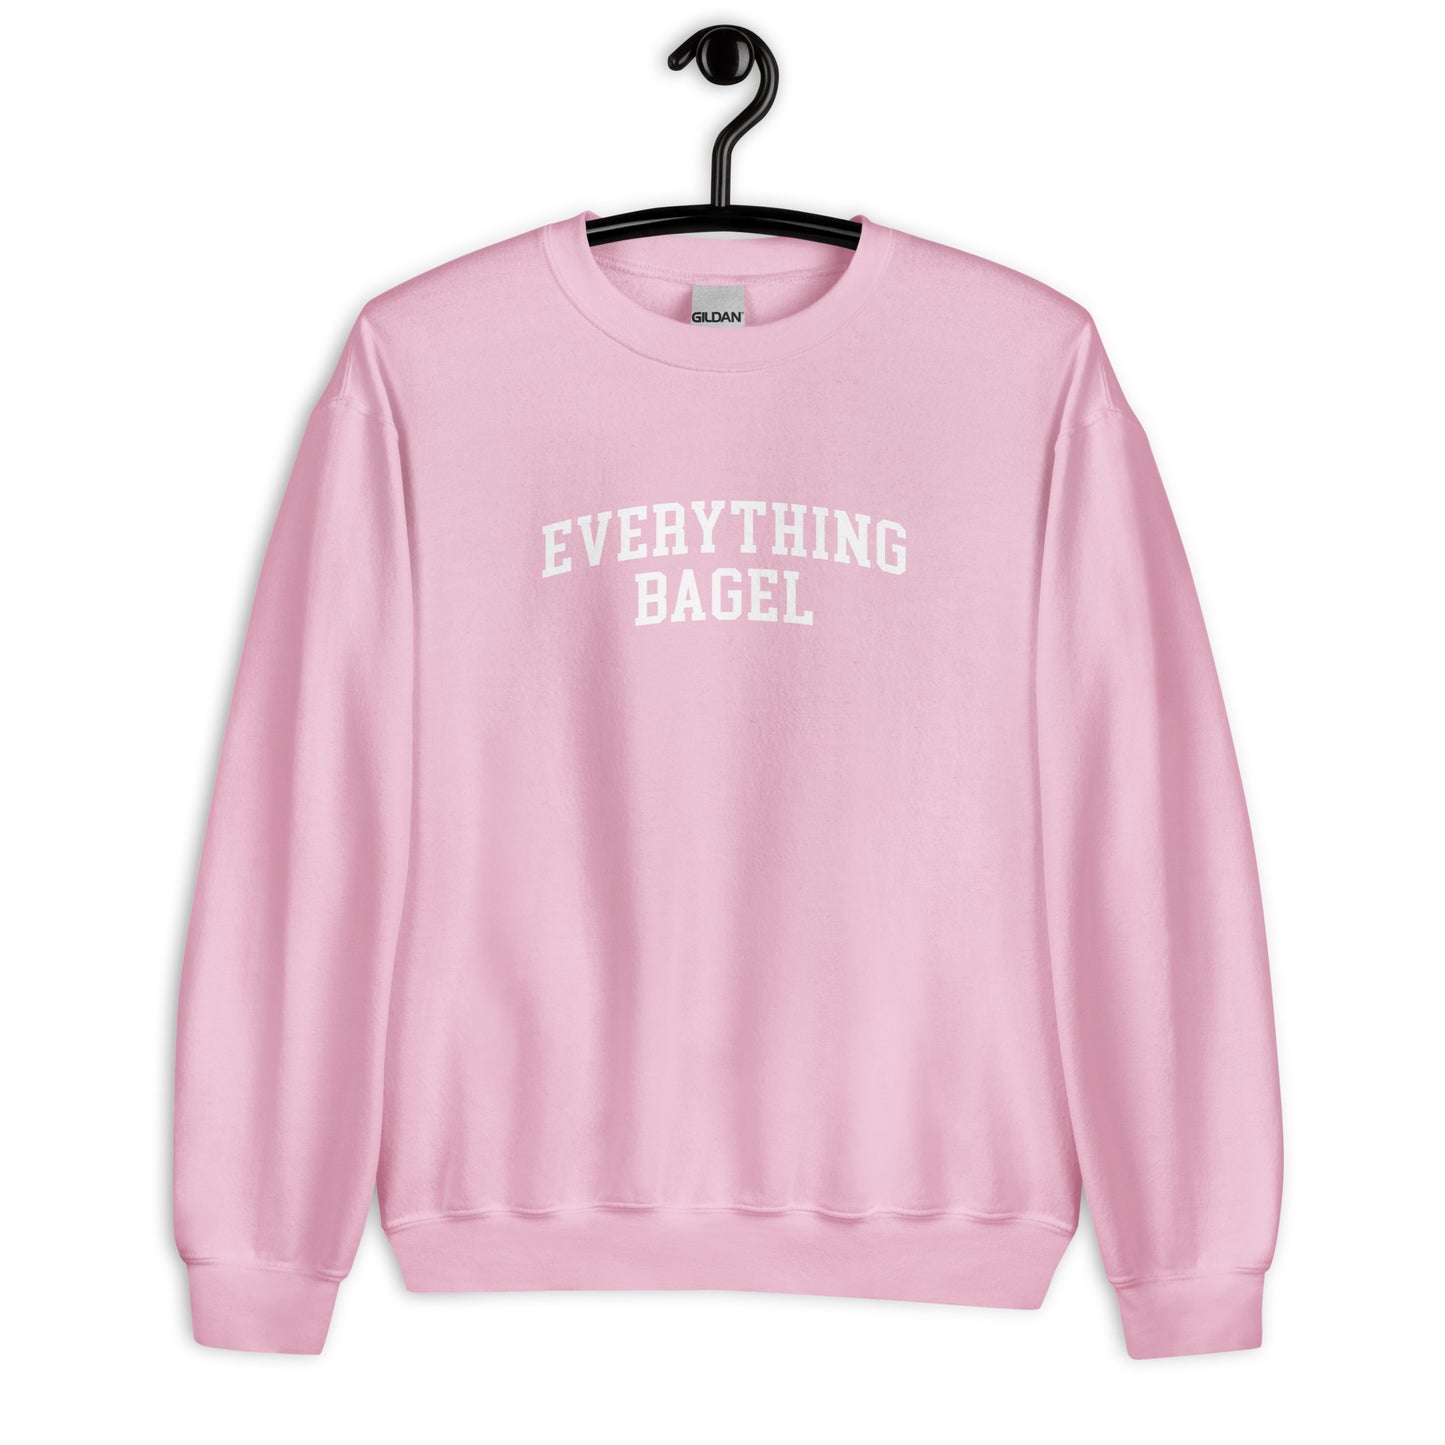 Everything Bagel Sweatshirt - Arched Font